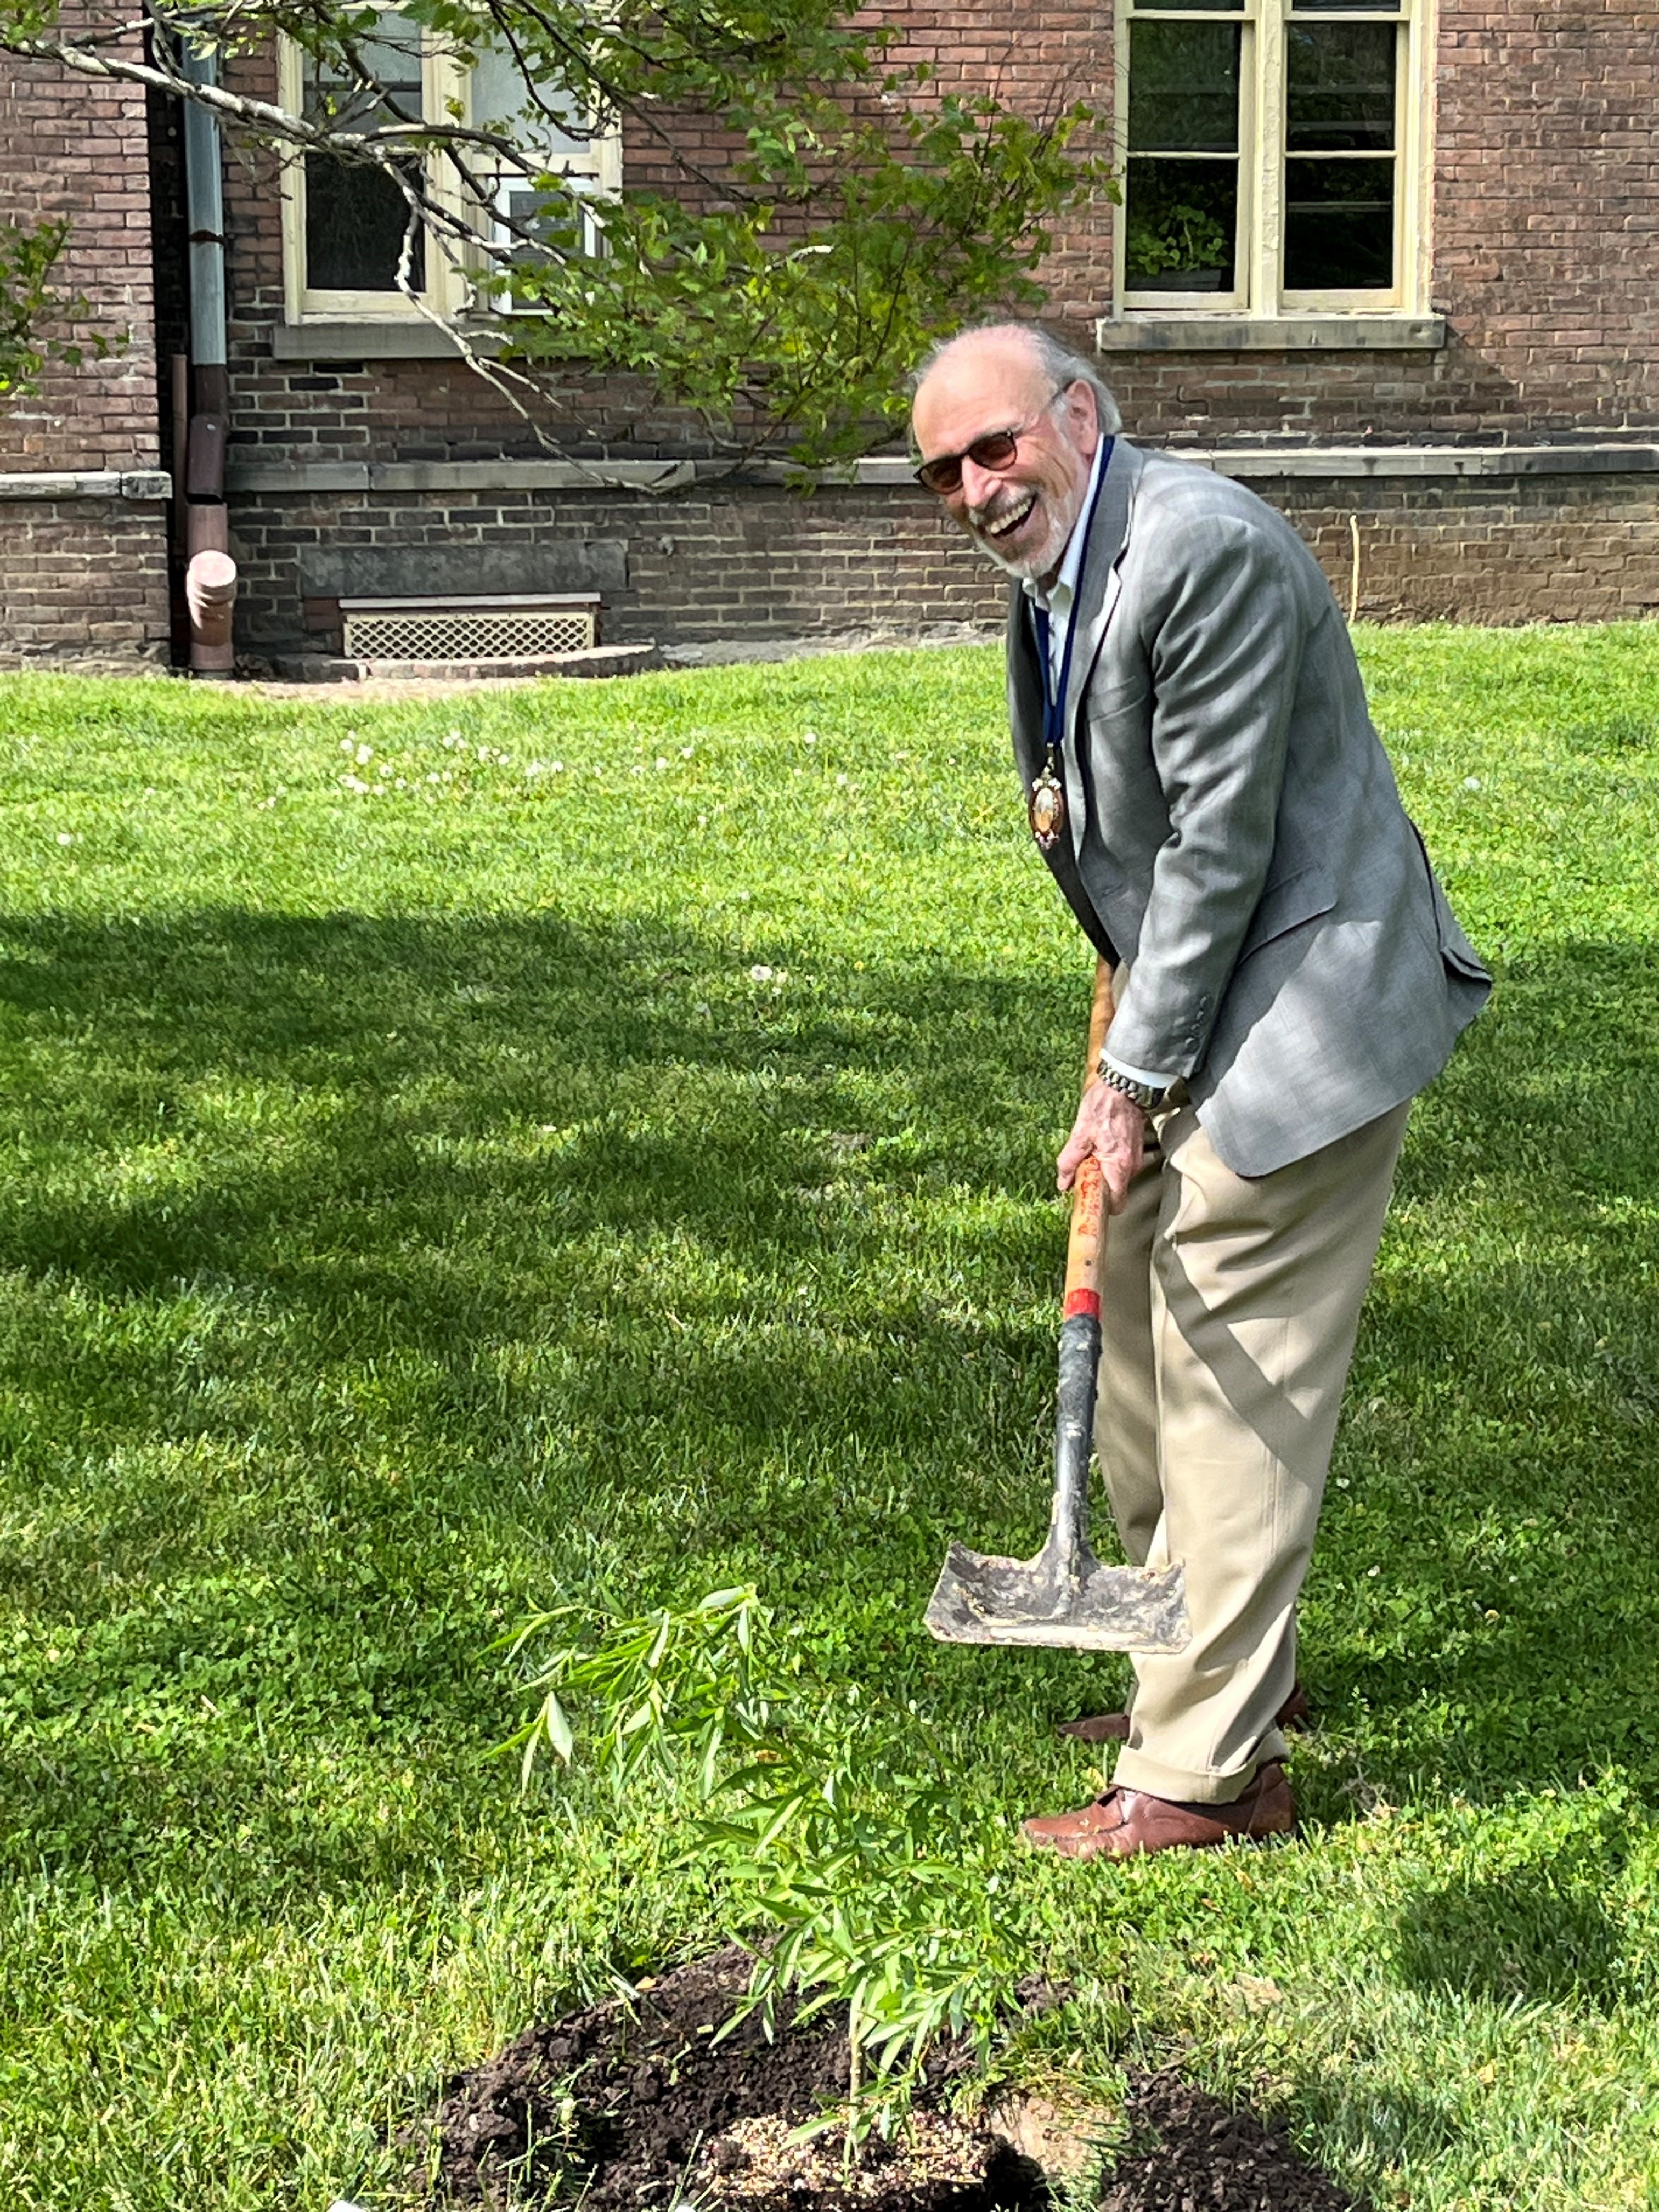 A photo of Robert DeMaria, Jr, Professor of English at Vassar College and scholar on the life and works of Samuel Johnson, planting a cutting.